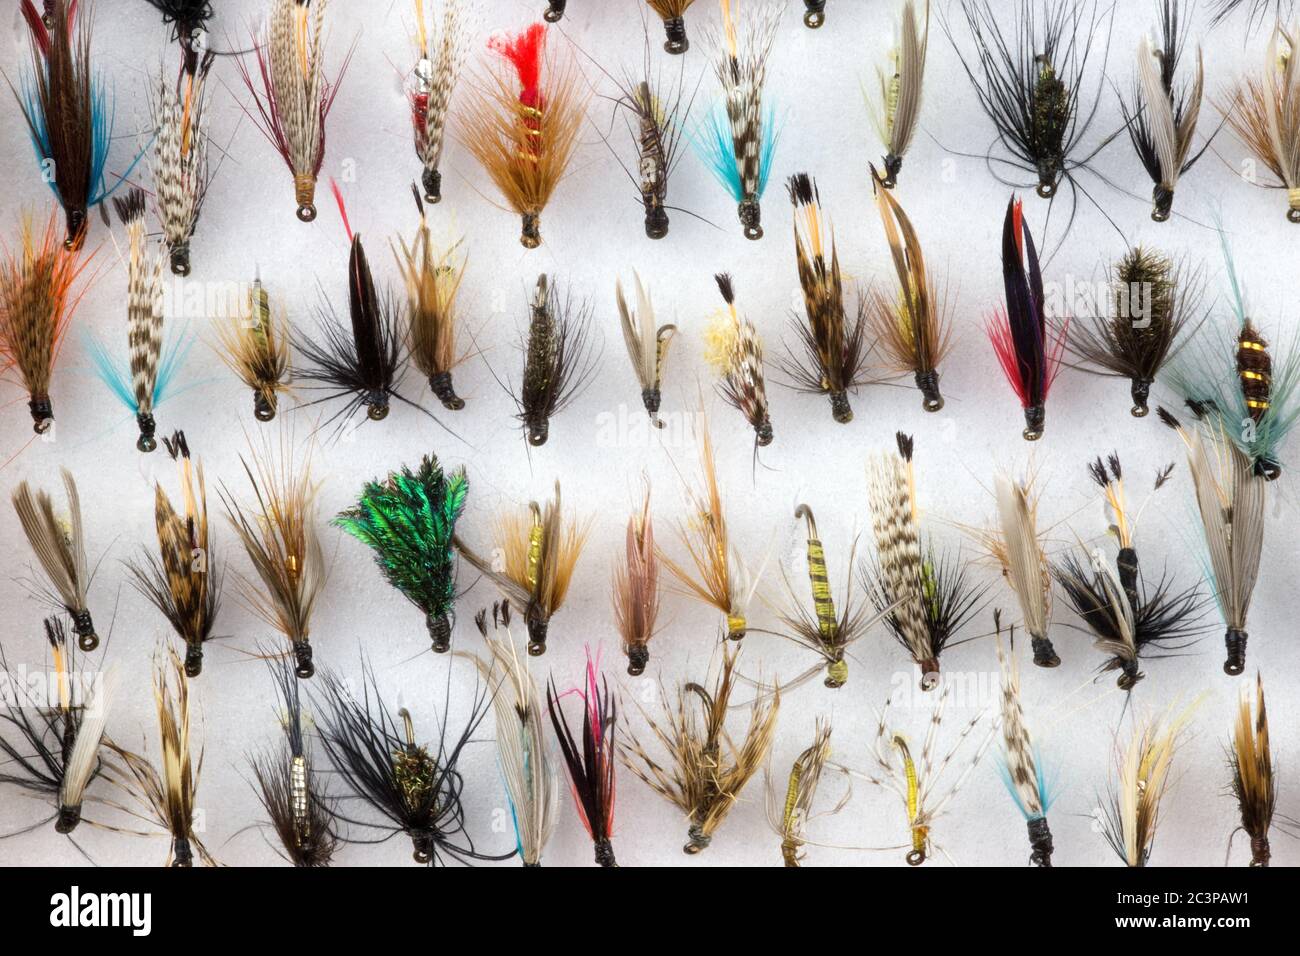 Selection of trout fishing flies in a white foam fly box Stock